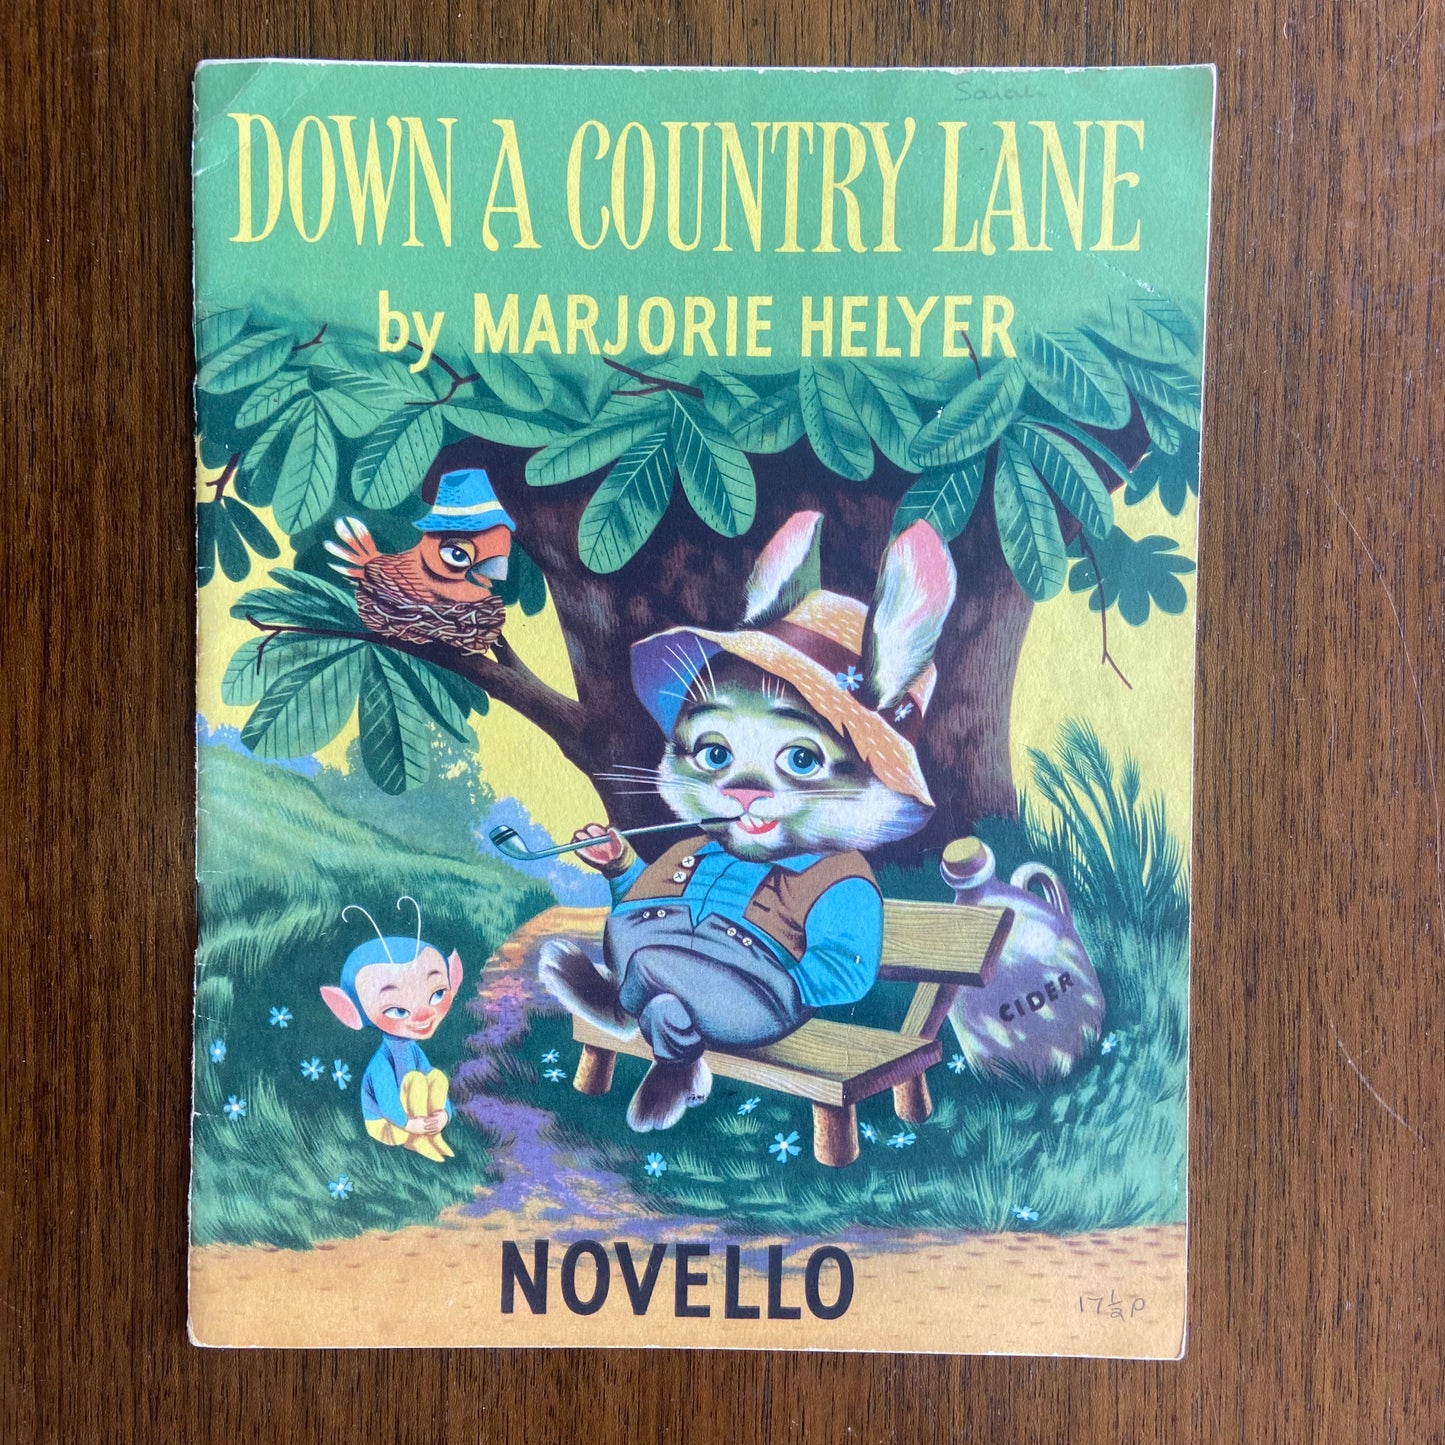 Down a Country Lane Sheet Music by Marjorie Heyler